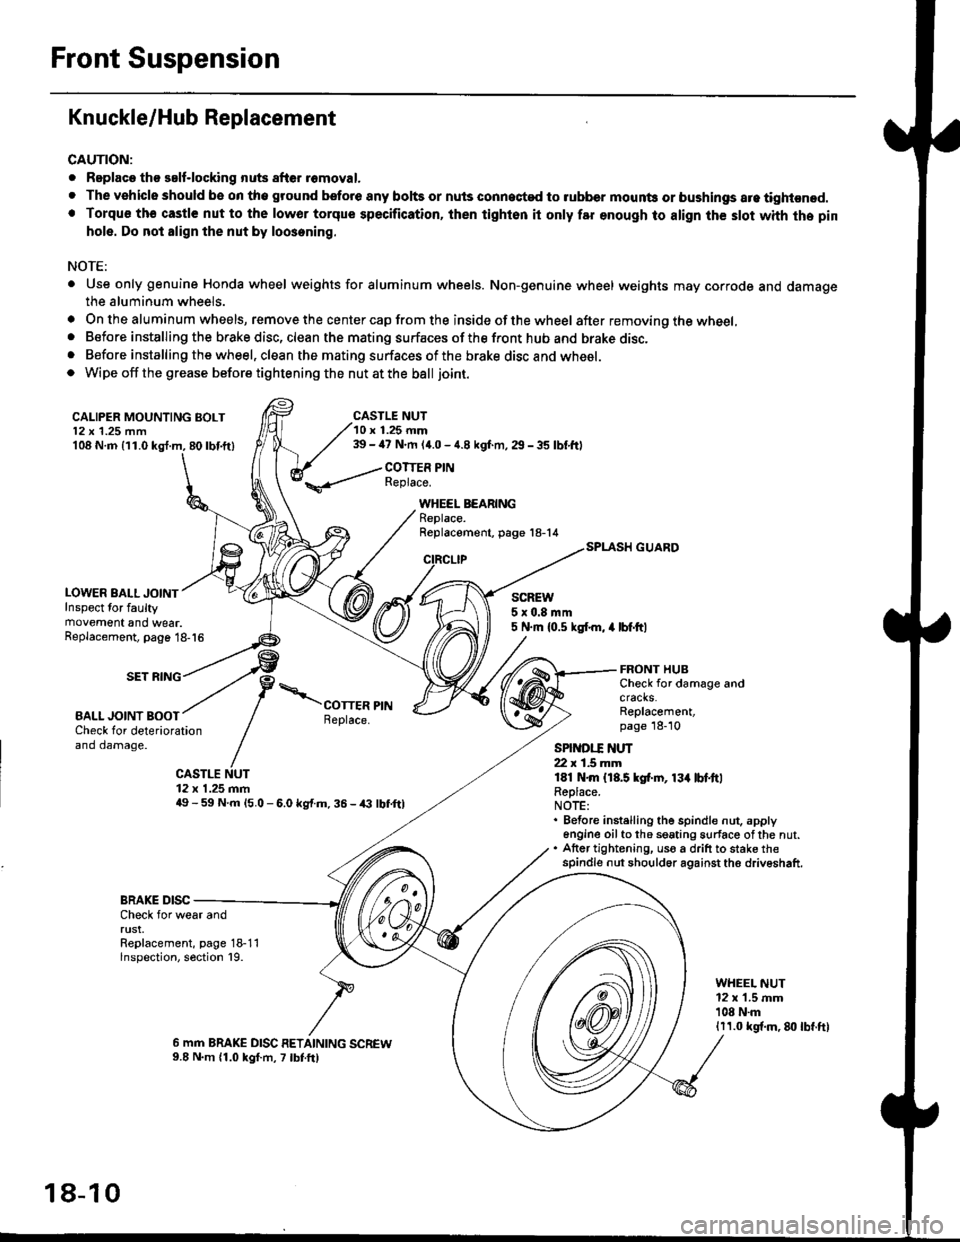 HONDA CIVIC 2000 6.G Workshop Manual Front Suspension
Knuckle/Hub Replacement
CAUTION:
. Replaco tho salf-locking nuts after romoval.
. The vehiclo should be on tho ground bsfore any bohs or nuls connected to rubber mounb or bushings are